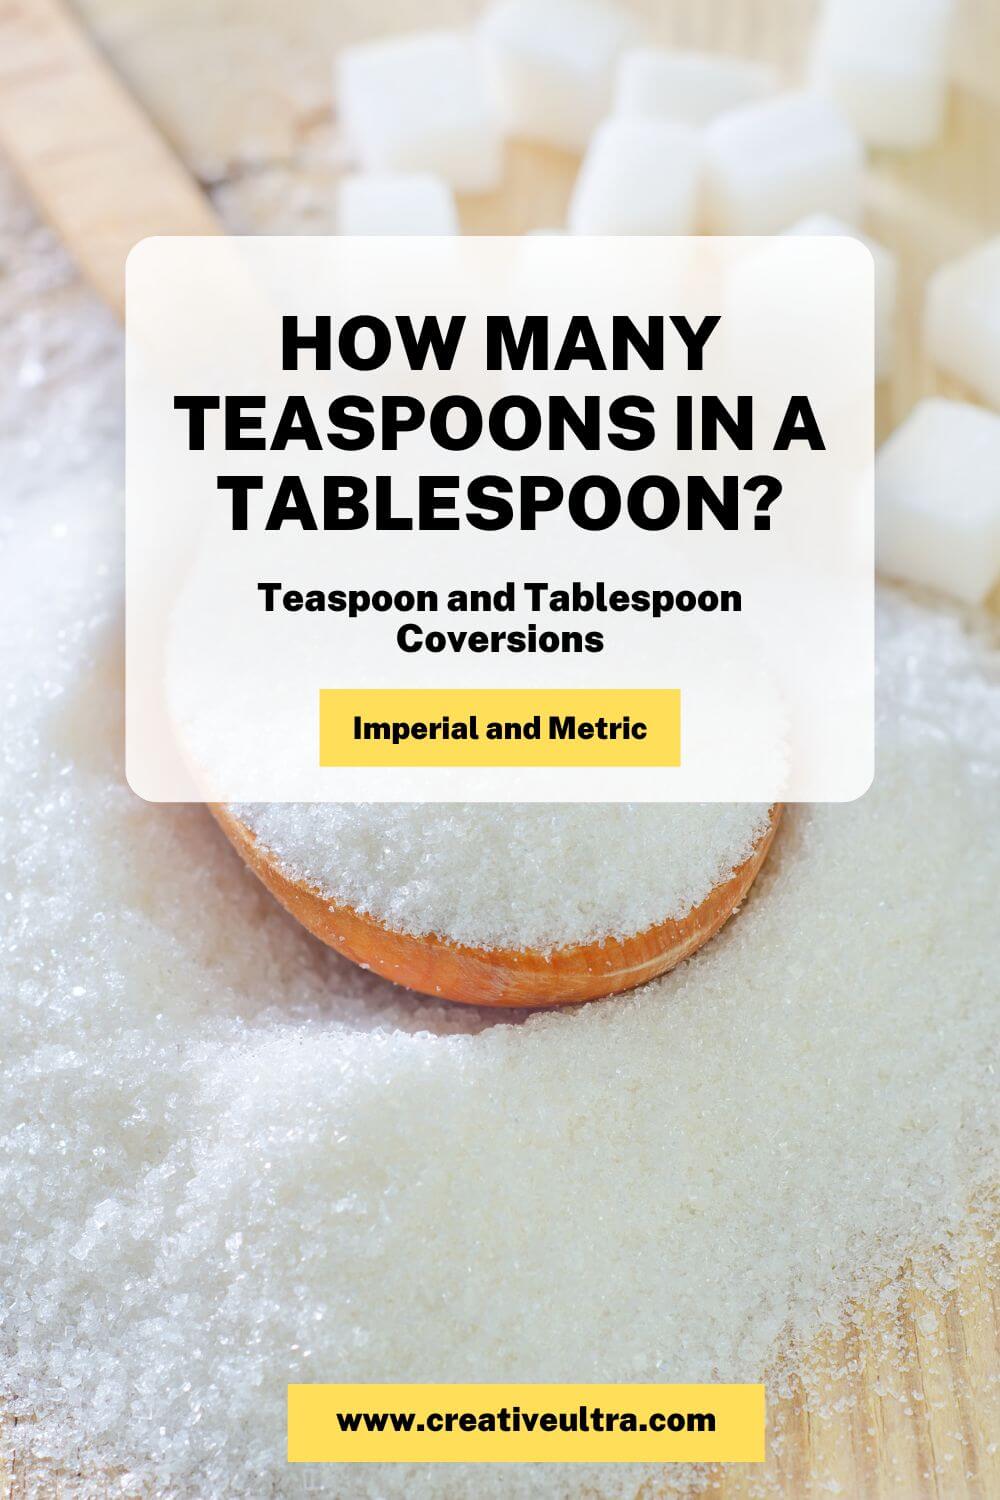 Learn how many teaspoons are in a tablespoon. This simple conversion of teaspoons in a tablespoon helps you measure ingredients accurately for perfect cooking.